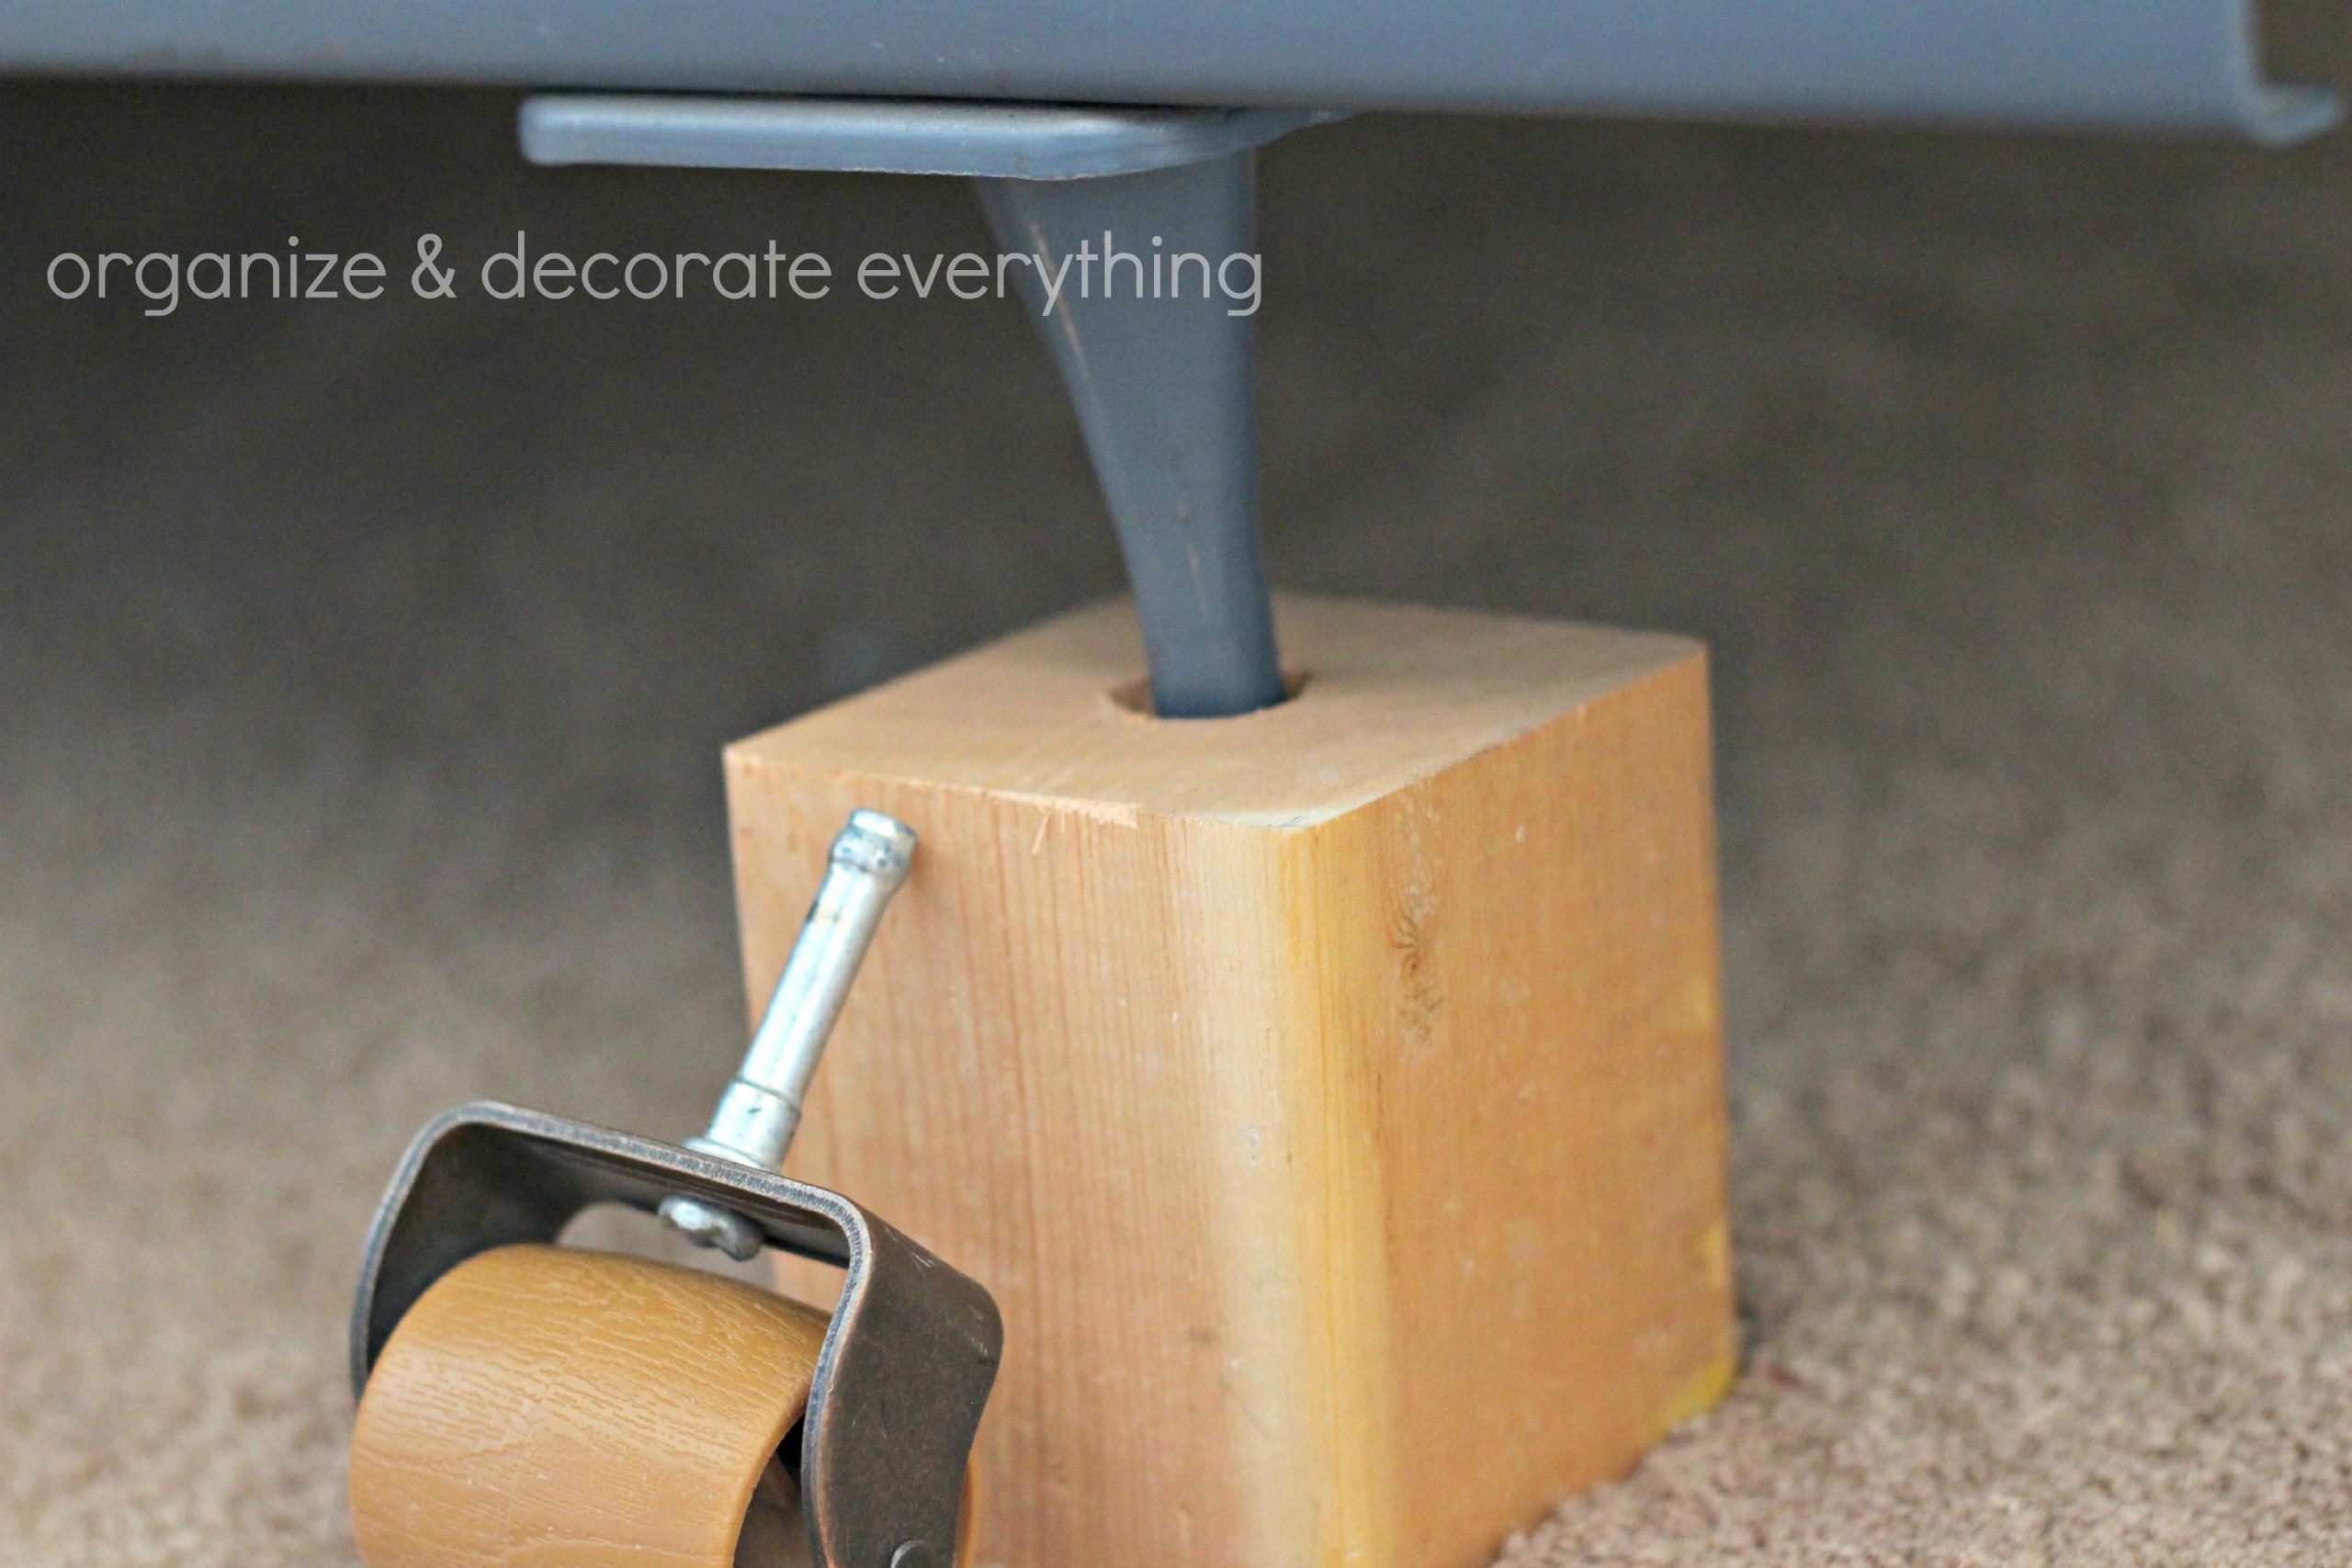 DIY Wooden Bed Risers
 DIY Bed Risers Organize and Decorate Everything